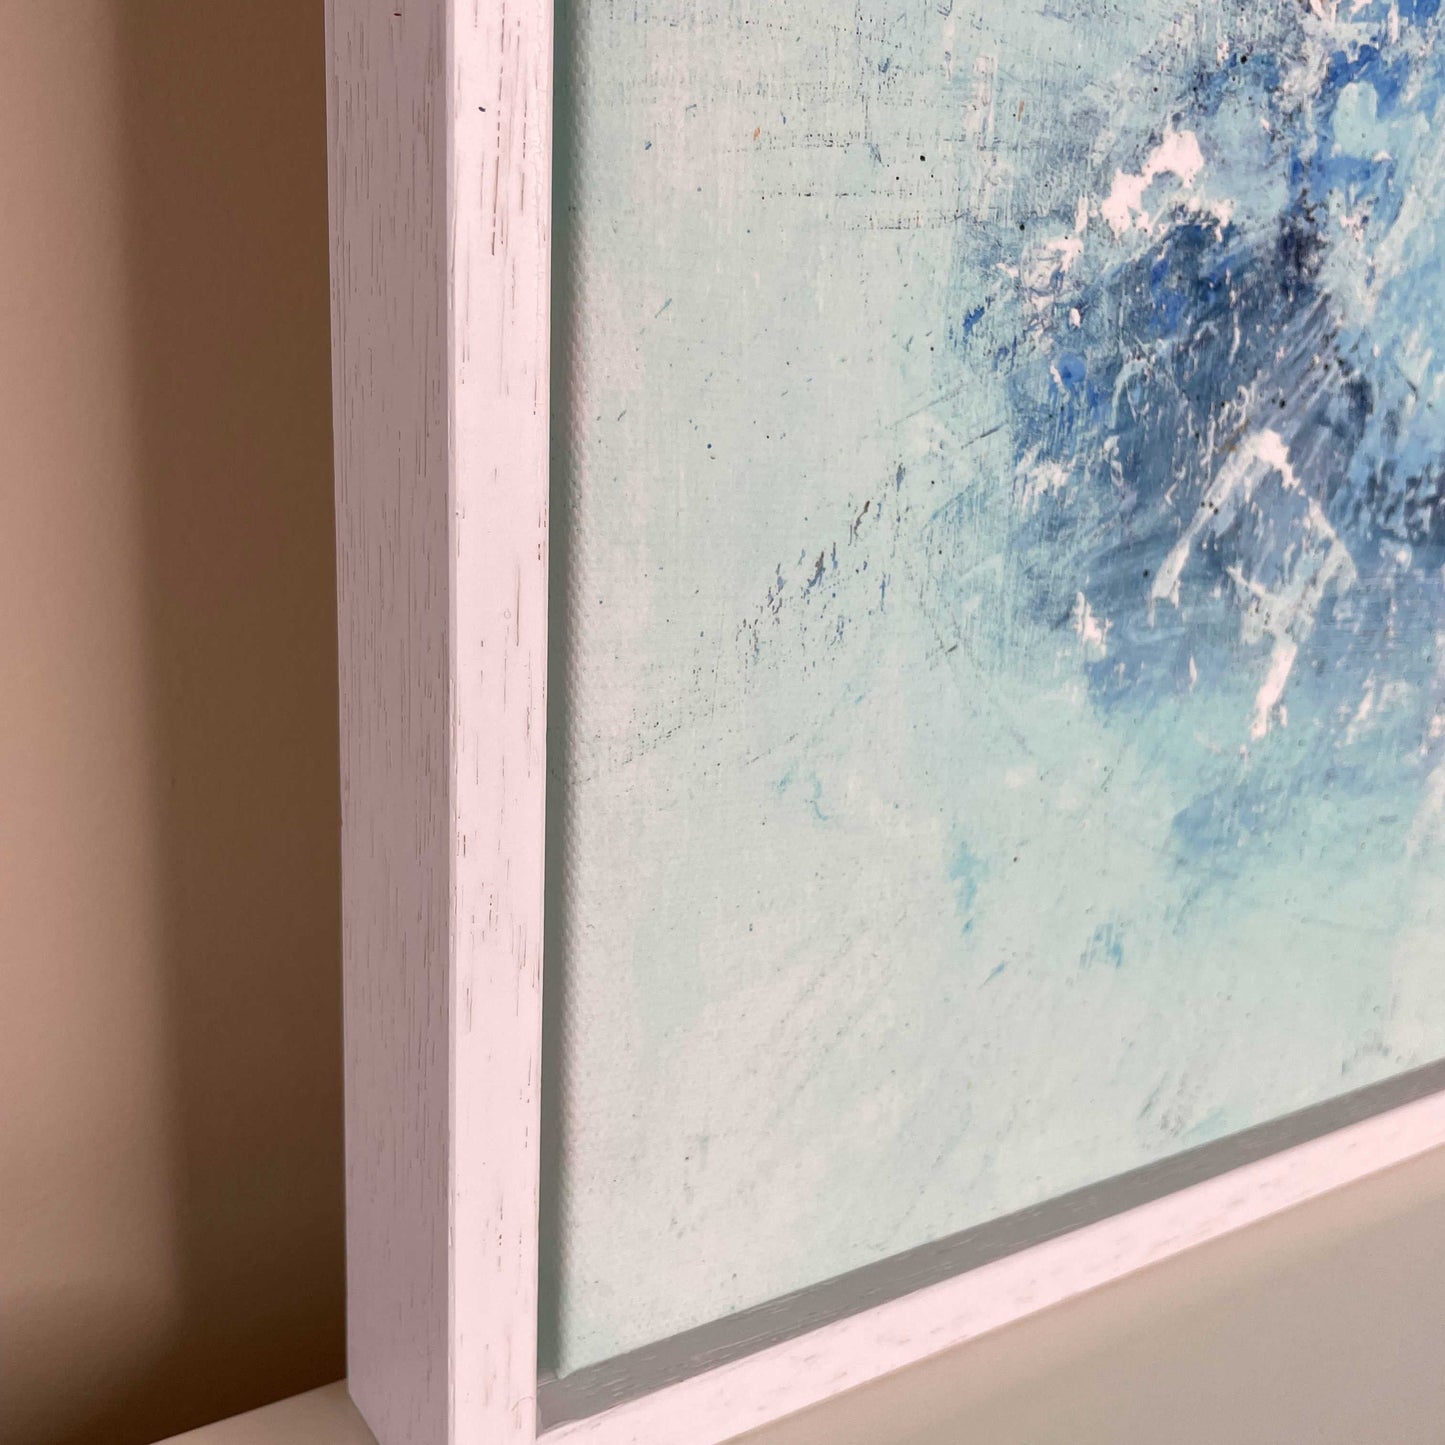 A close up of the canvas and frame on the Print of an acrylic painting of a ballerina painted in blue.